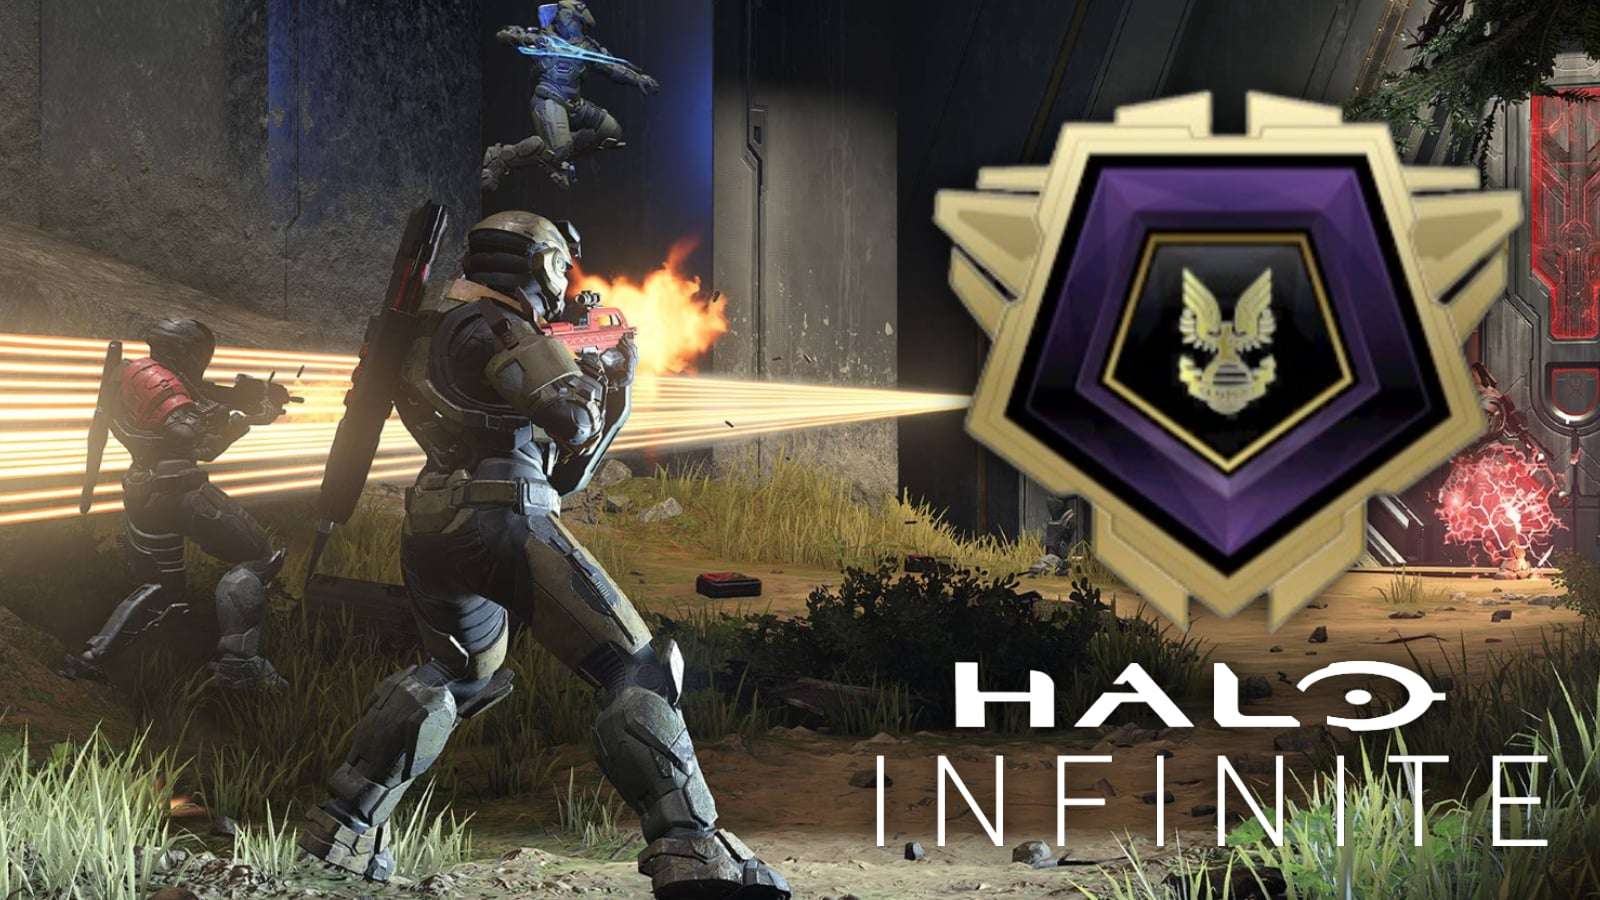 Halo Infinite players slam ranked playlist for "cursed" reward system